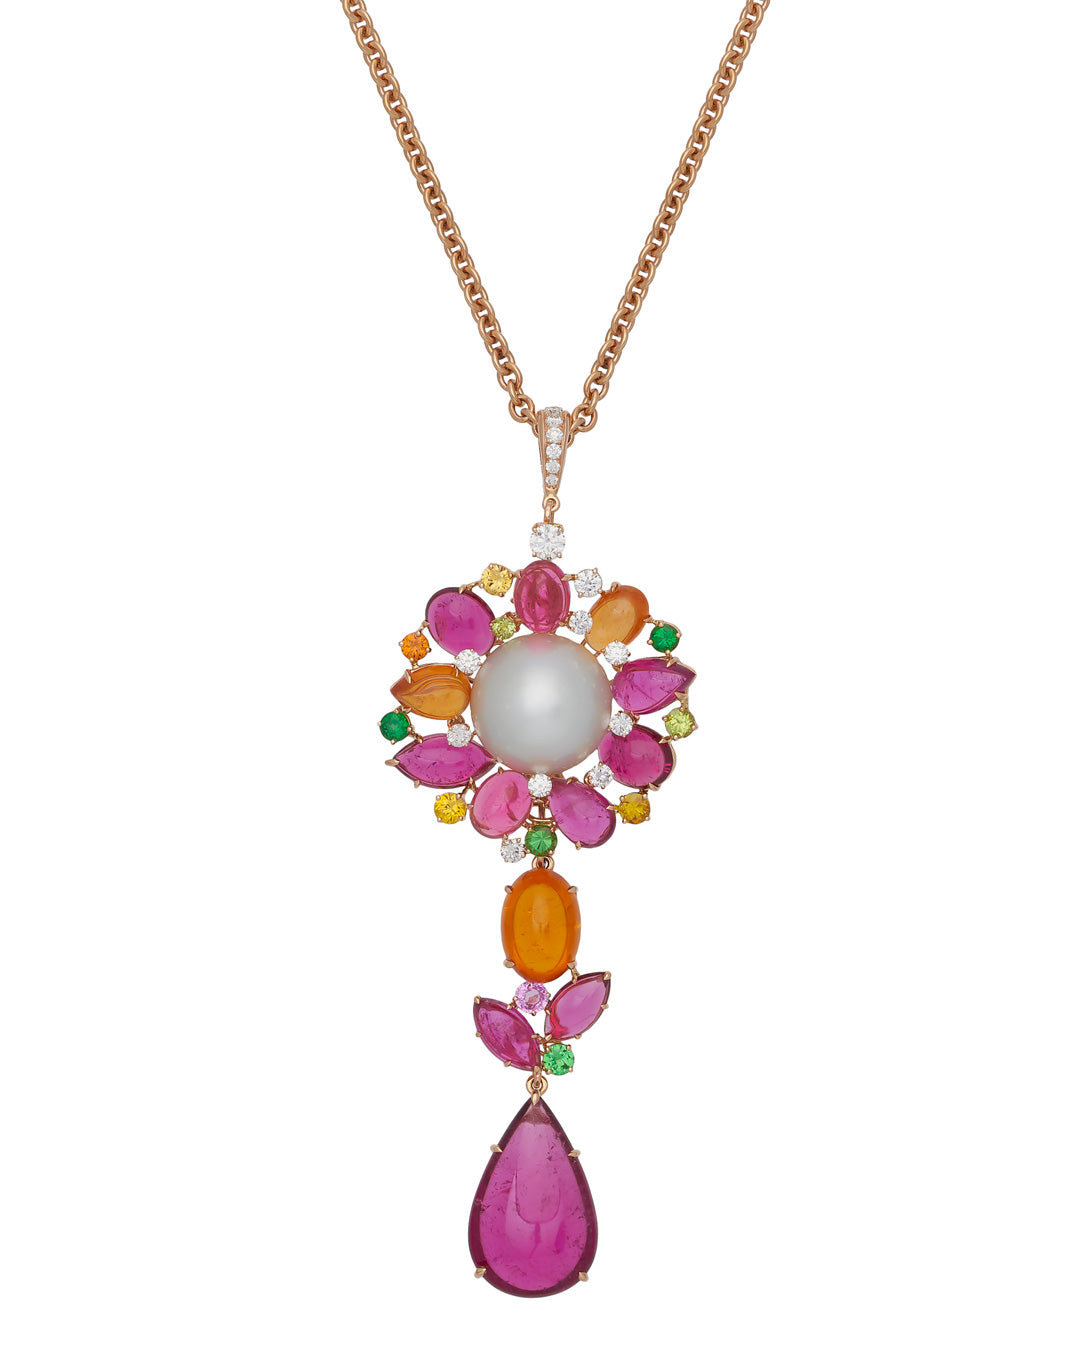 Sunflower pendant with Australian South Sea Pearl enhanced by a myriad of gemstones, crafted in 18 karat rose gold